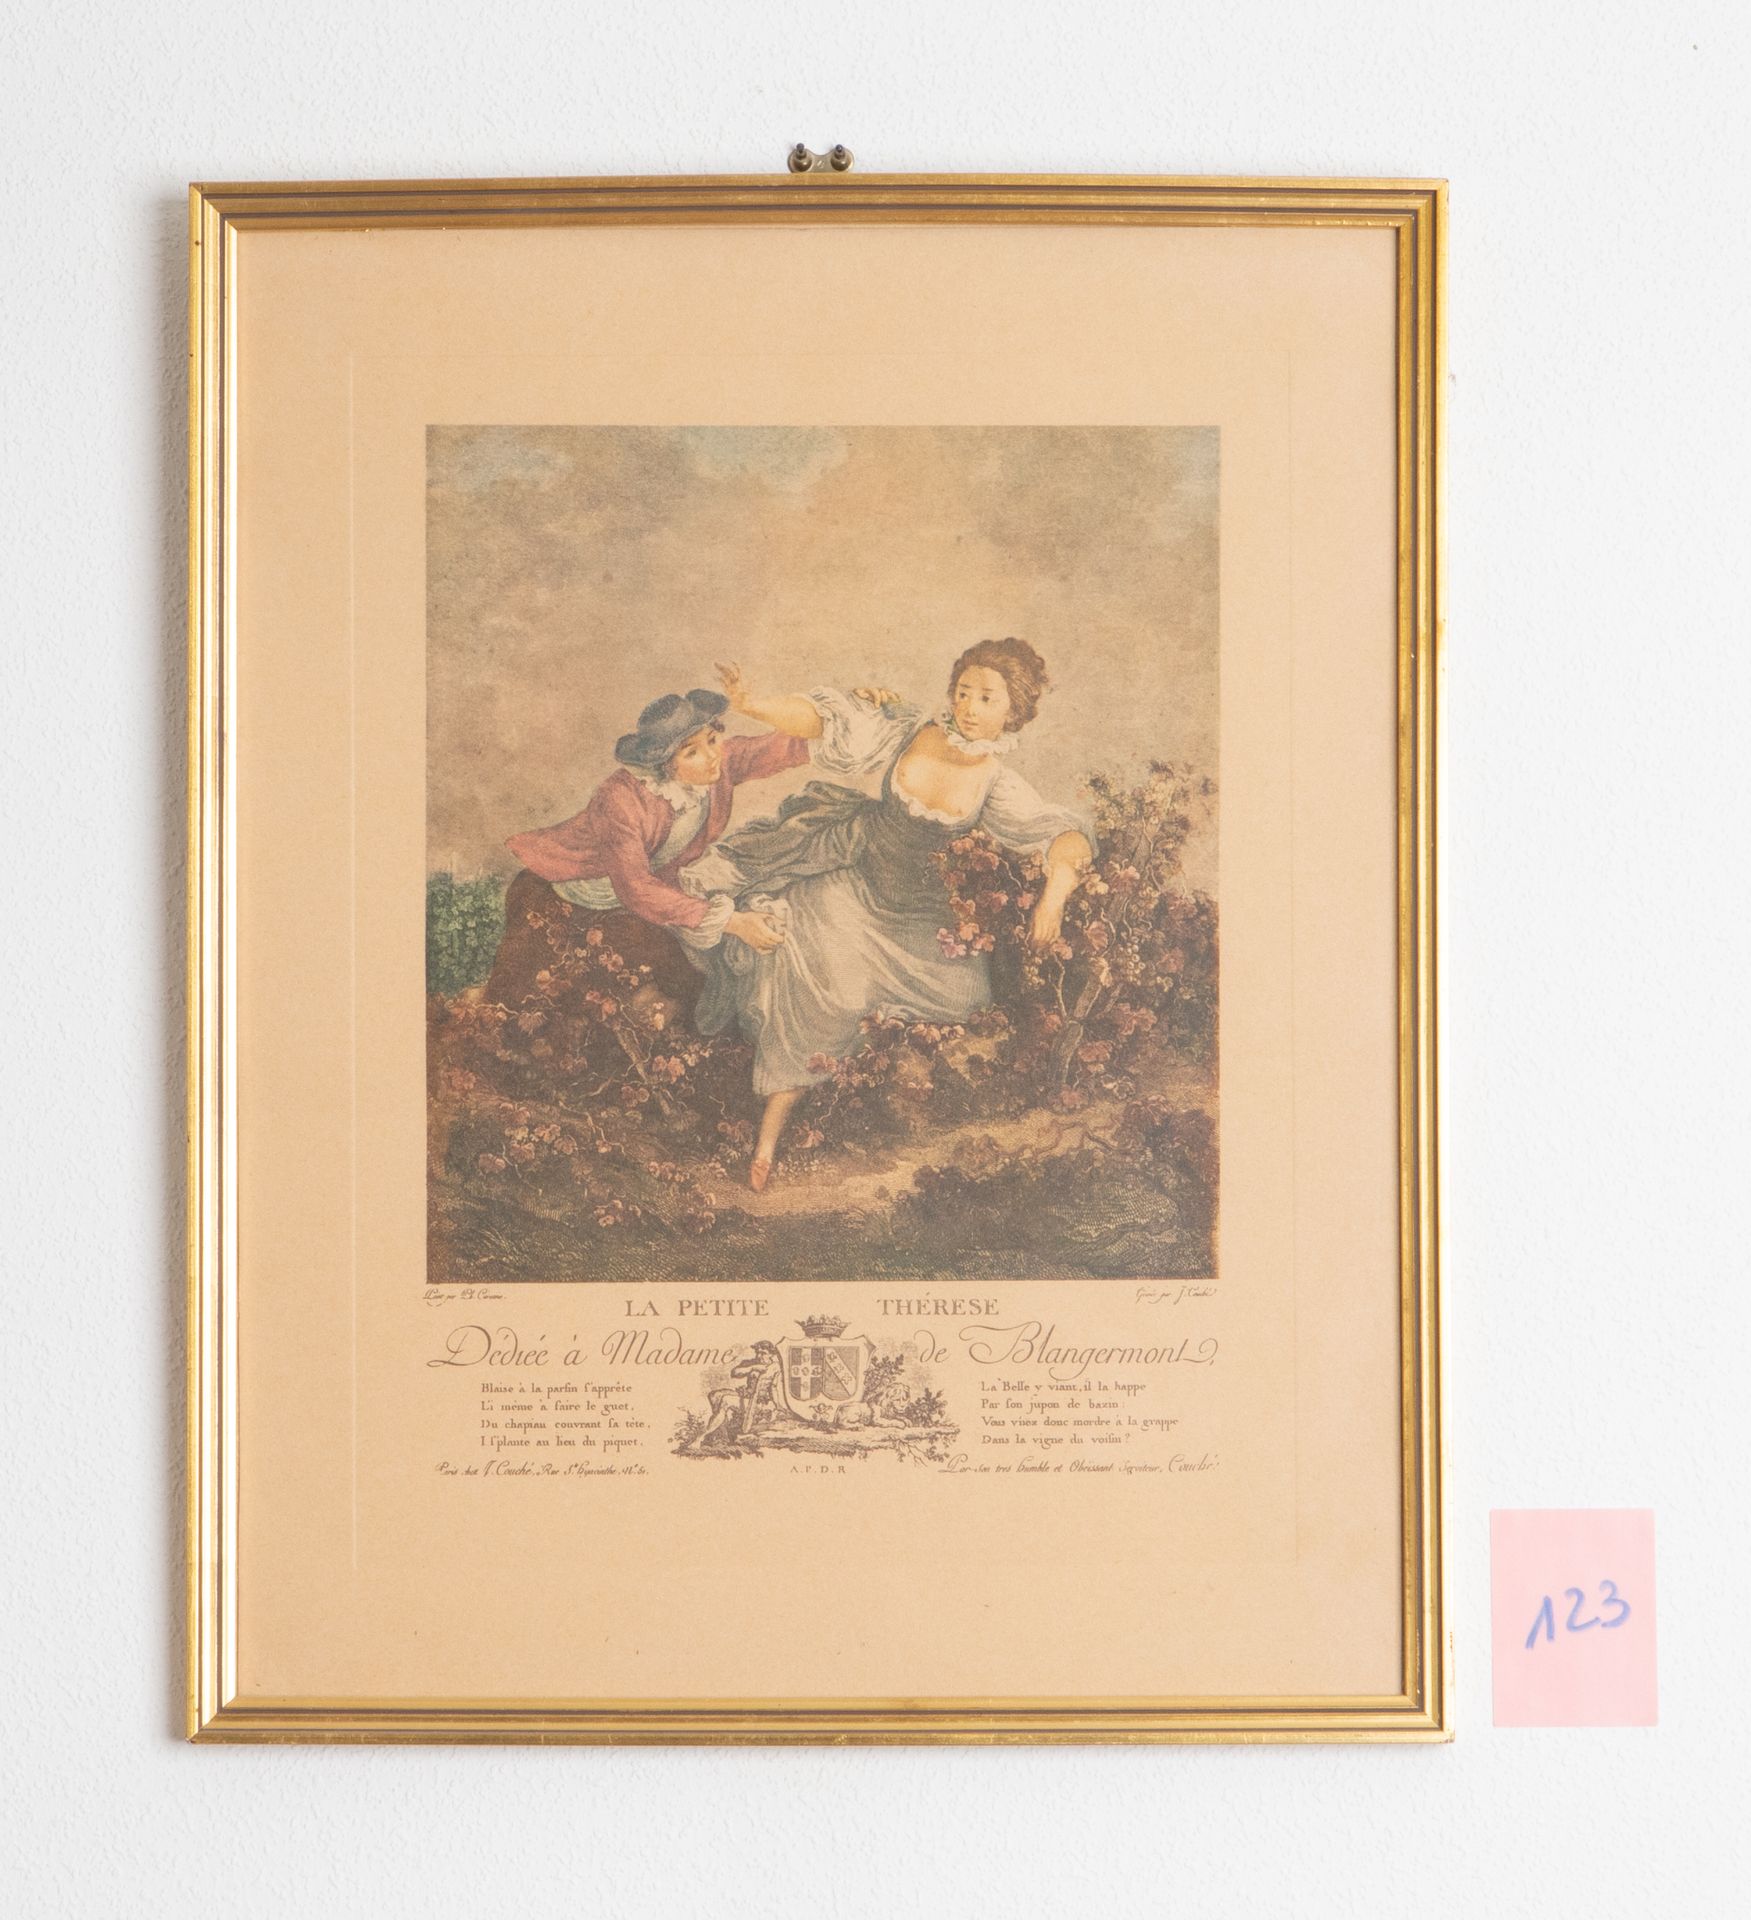 The little Therese dedicated to Madame DE BLANGERON. APD…